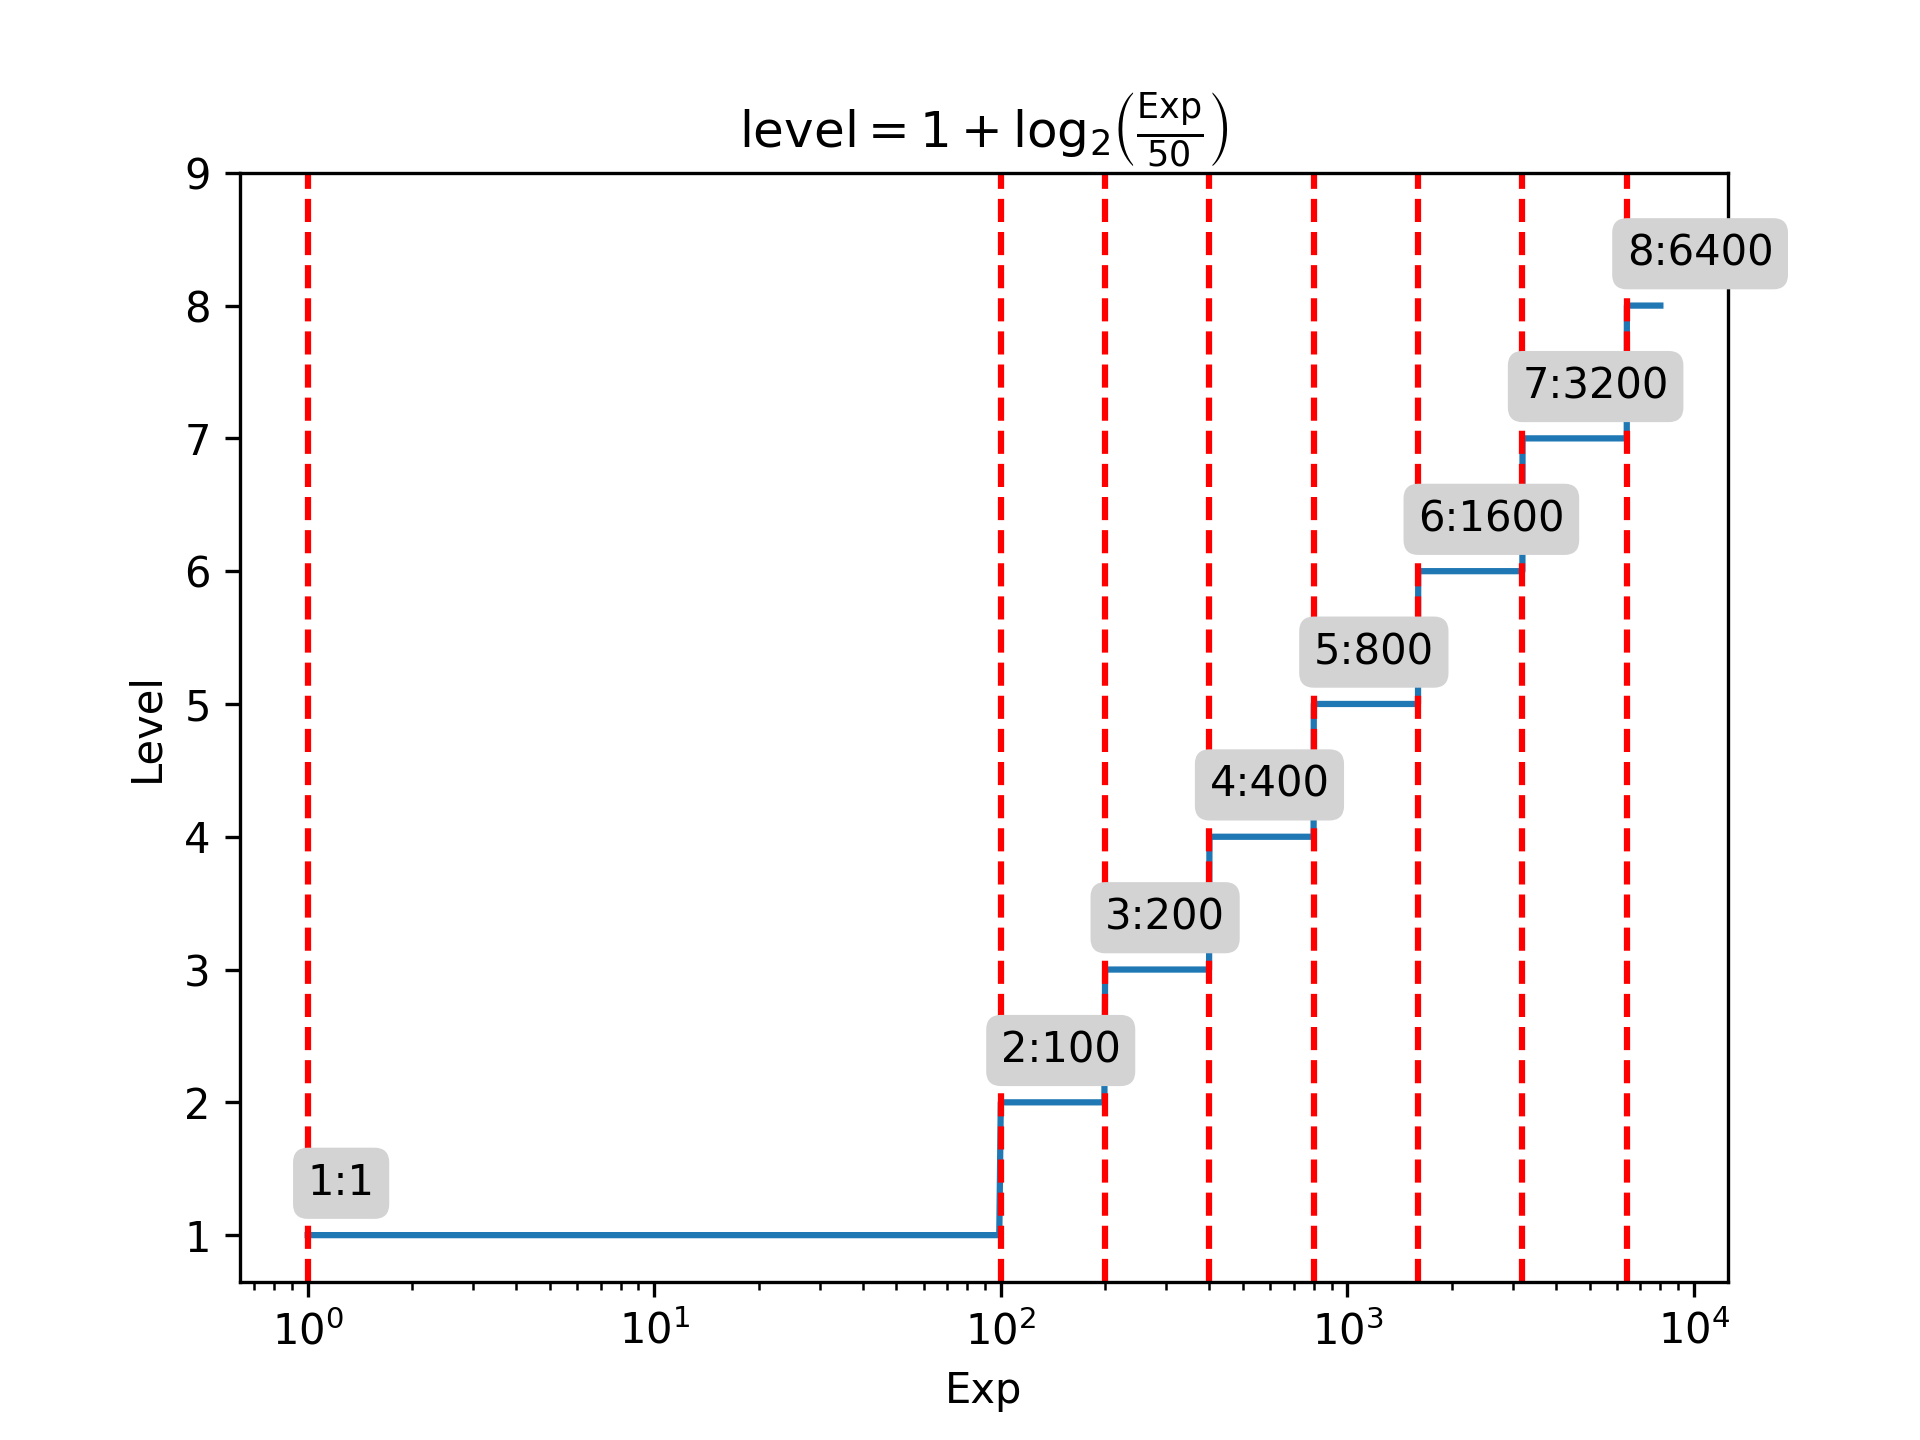 Experience and level, log scale